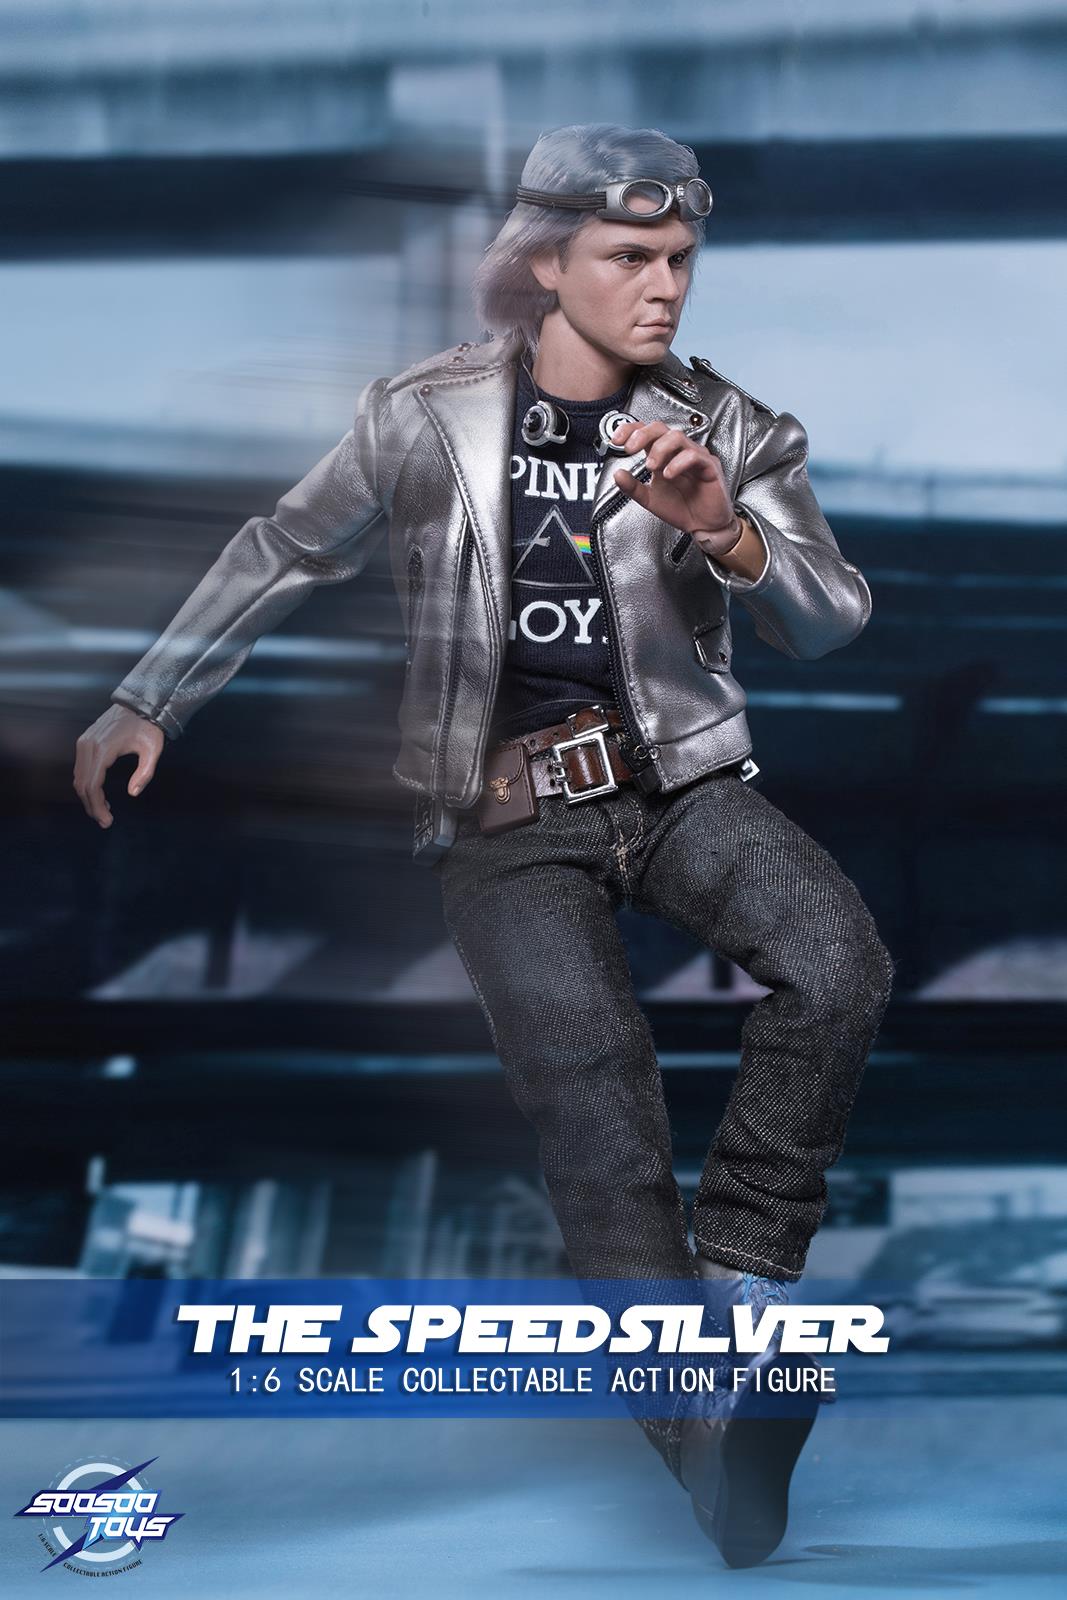 toyhaven: SooSooToys 1/6th scale The Speedsilver collectible figure aka Evan Peters ...1067 x 1600